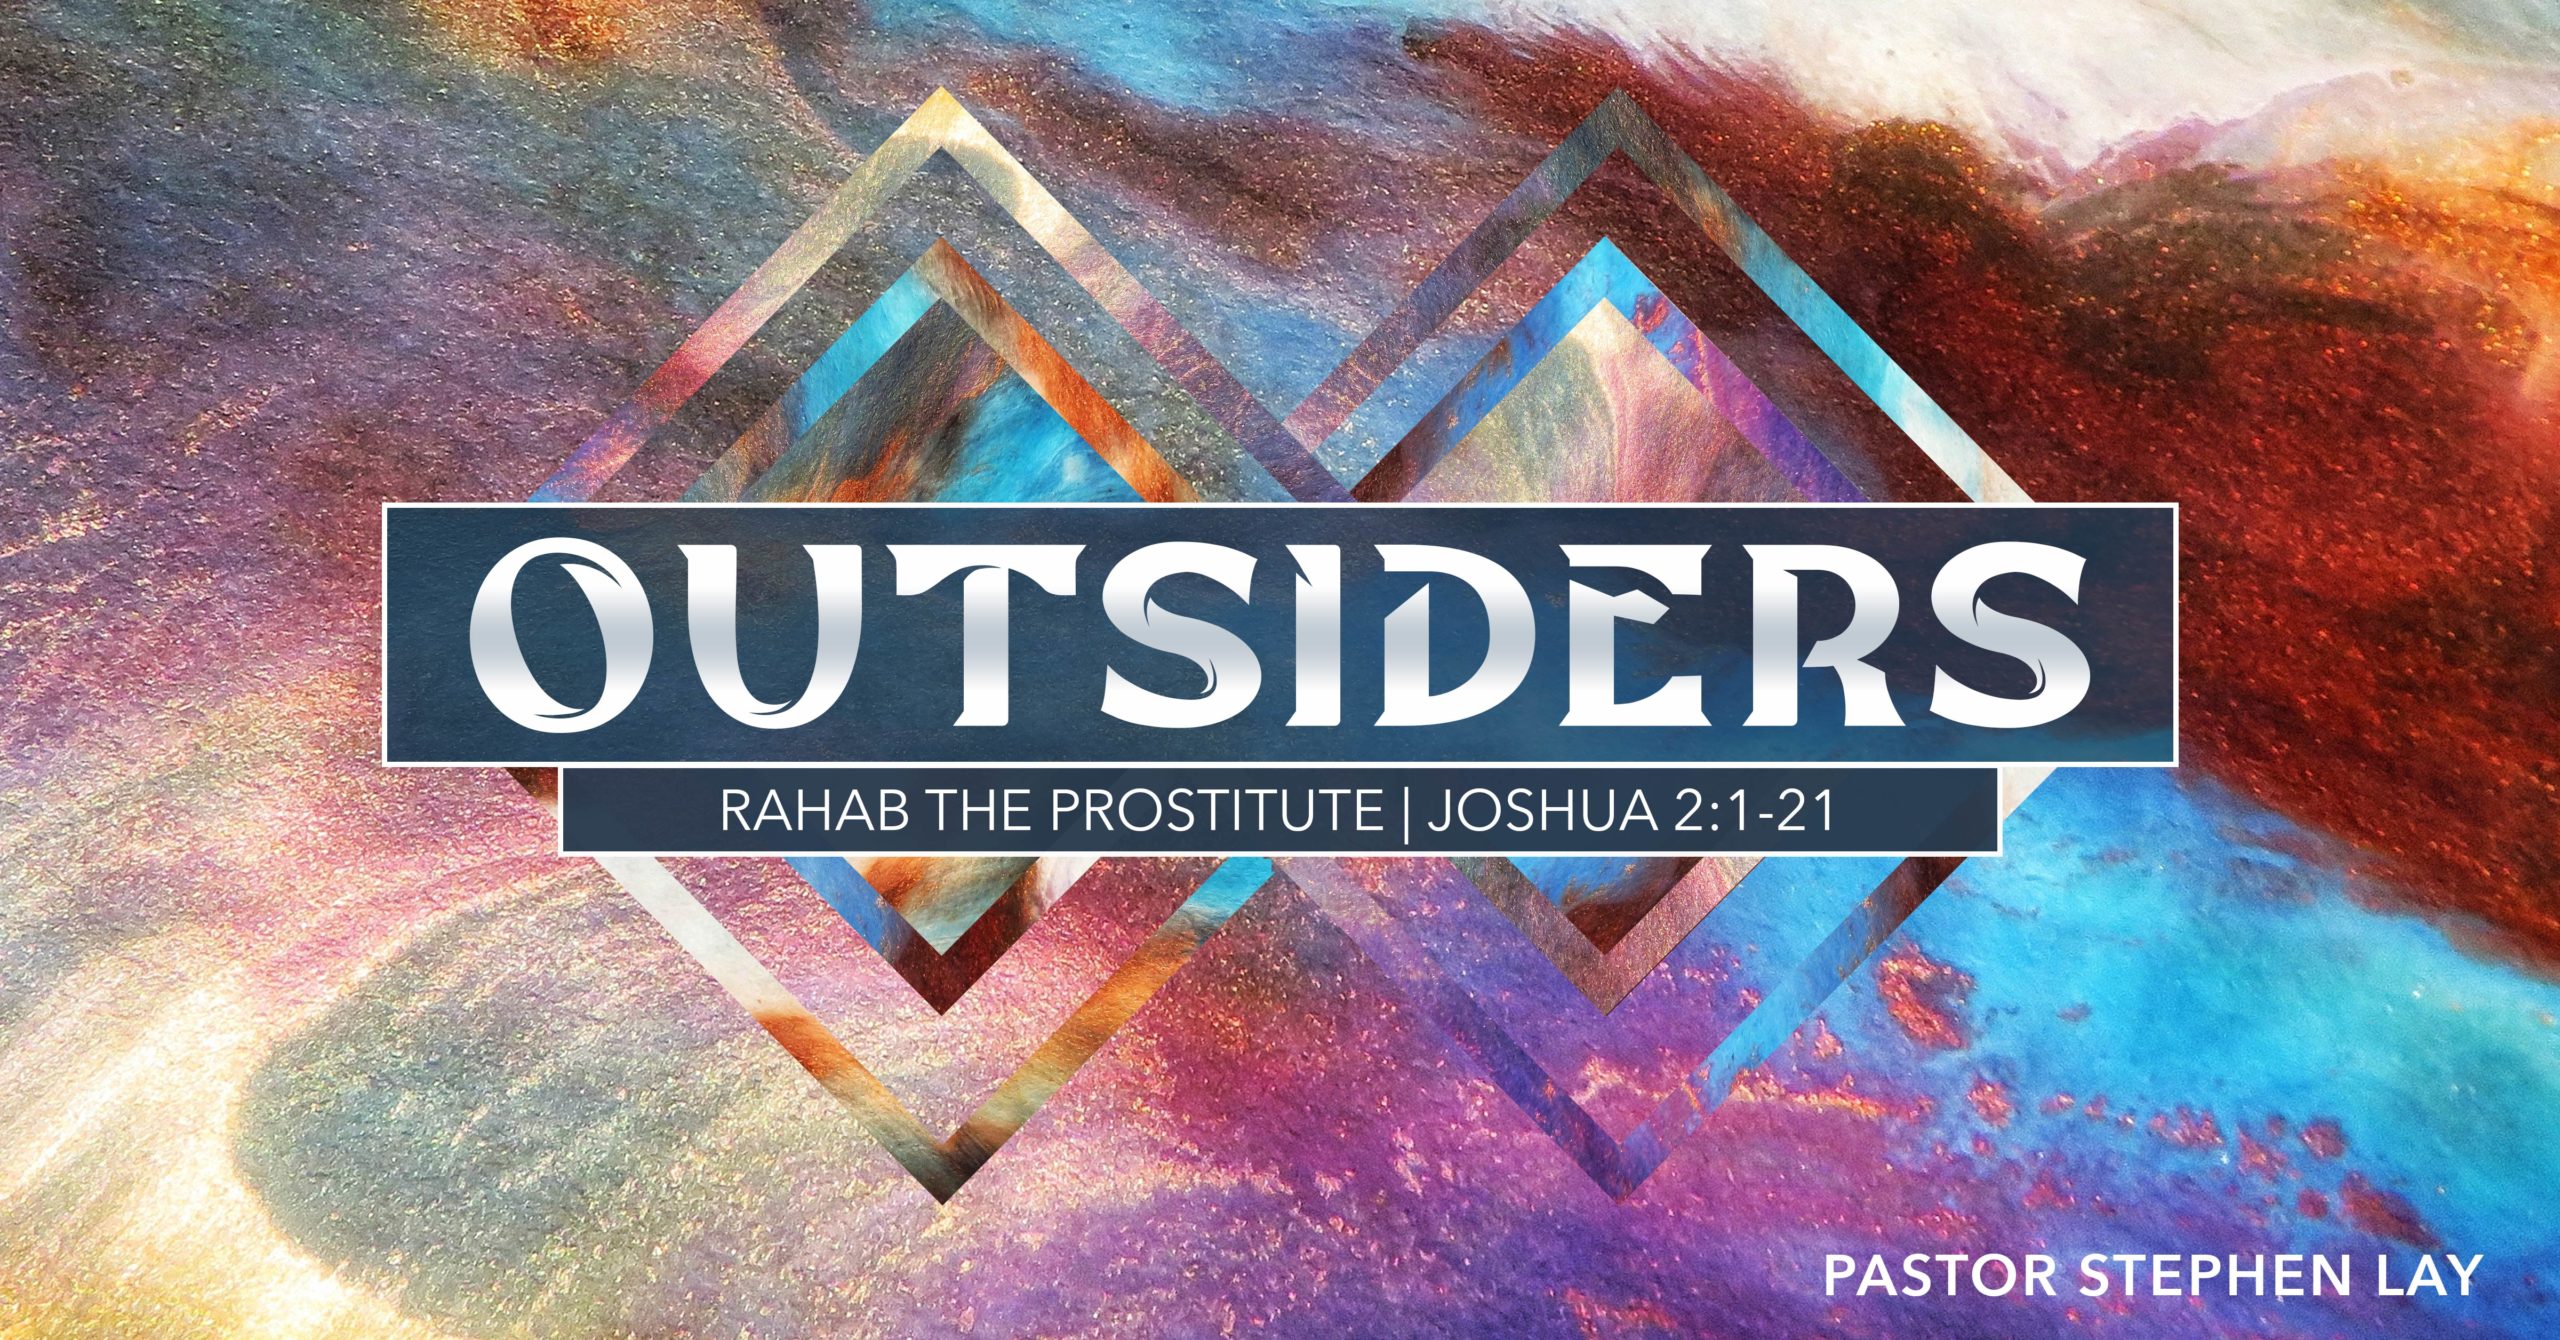 Outsiders: Rahab the Prostitute